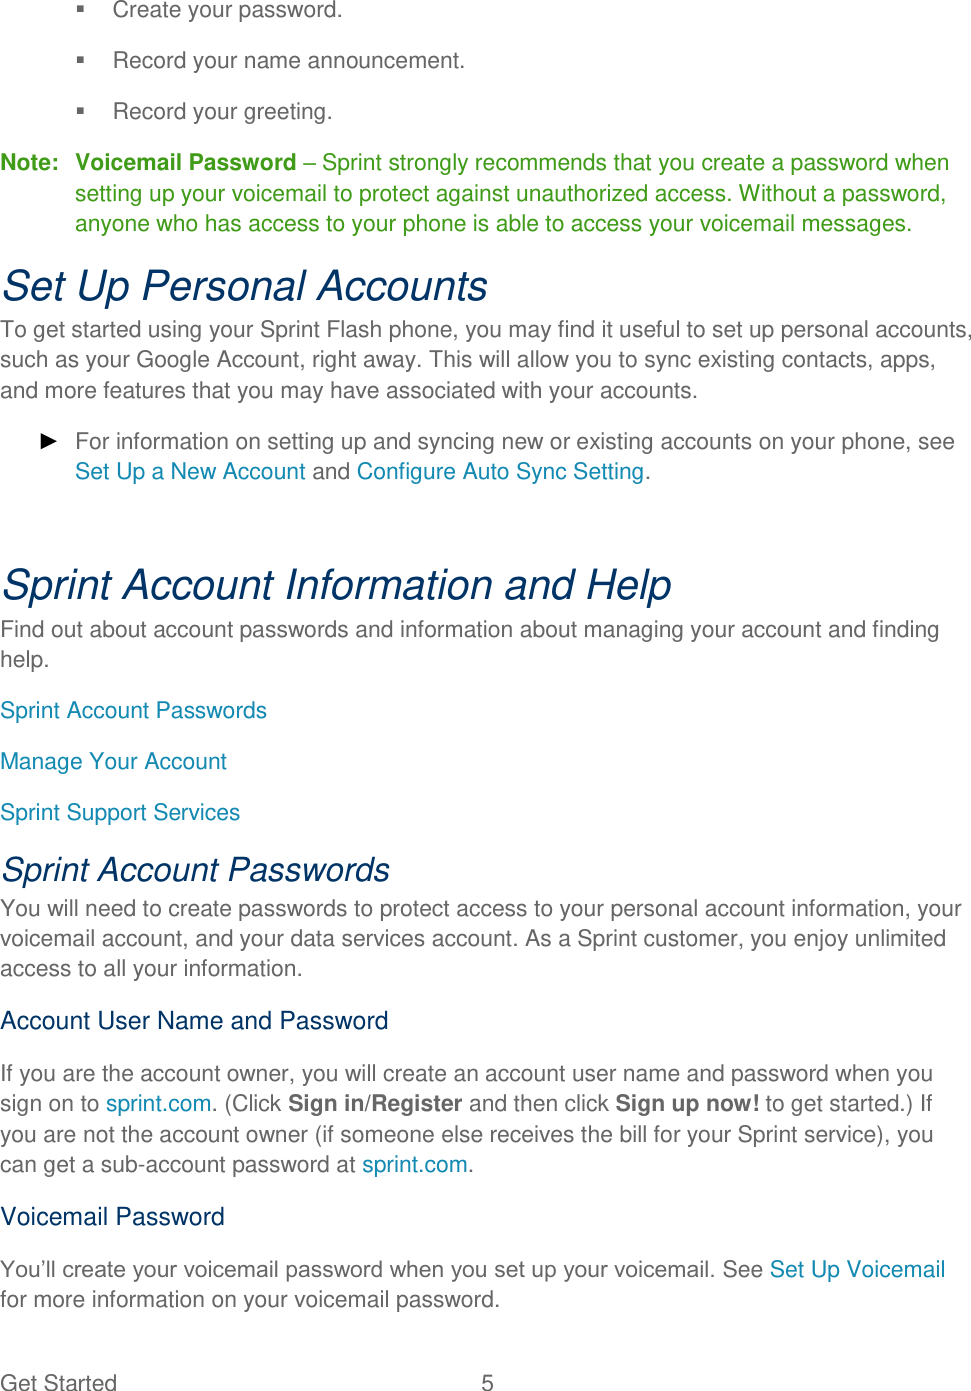 Get Started  5     Create your password.   Record your name announcement.   Record your greeting. Note:  Voicemail Password – Sprint strongly recommends that you create a password when setting up your voicemail to protect against unauthorized access. Without a password, anyone who has access to your phone is able to access your voicemail messages. Set Up Personal Accounts To get started using your Sprint Flash phone, you may find it useful to set up personal accounts, such as your Google Account, right away. This will allow you to sync existing contacts, apps, and more features that you may have associated with your accounts.  ► For information on setting up and syncing new or existing accounts on your phone, see Set Up a New Account and Configure Auto Sync Setting.  Sprint Account Information and Help Find out about account passwords and information about managing your account and finding help. Sprint Account Passwords Manage Your Account Sprint Support Services Sprint Account Passwords You will need to create passwords to protect access to your personal account information, your voicemail account, and your data services account. As a Sprint customer, you enjoy unlimited access to all your information. Account User Name and Password If you are the account owner, you will create an account user name and password when you sign on to sprint.com. (Click Sign in/Register and then click Sign up now! to get started.) If you are not the account owner (if someone else receives the bill for your Sprint service), you can get a sub-account password at sprint.com. Voicemail Password You’ll create your voicemail password when you set up your voicemail. See Set Up Voicemail for more information on your voicemail password. 